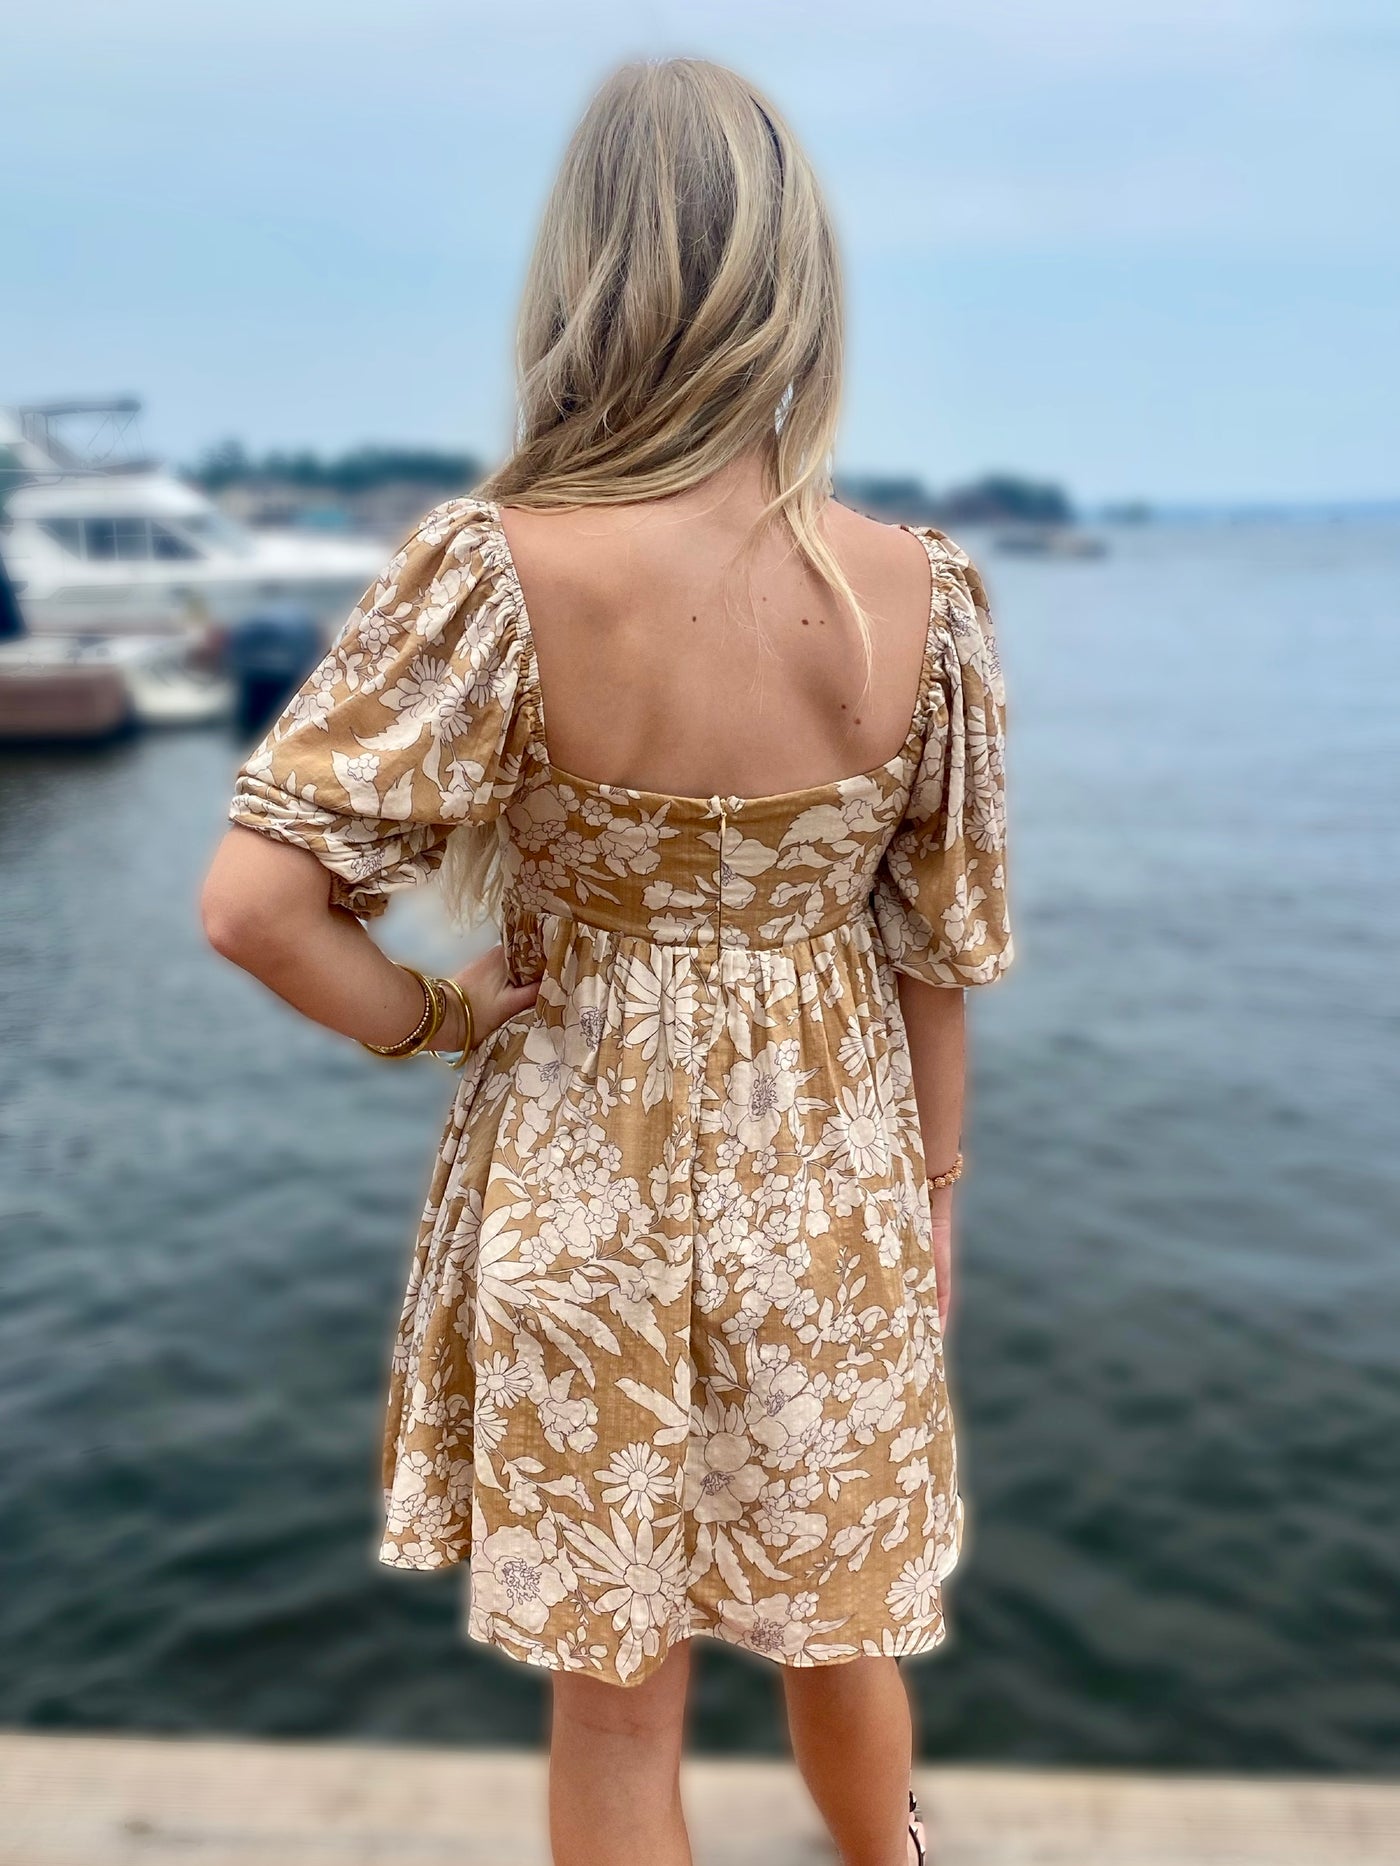 BACK VIEW OF AVA IN DRESS